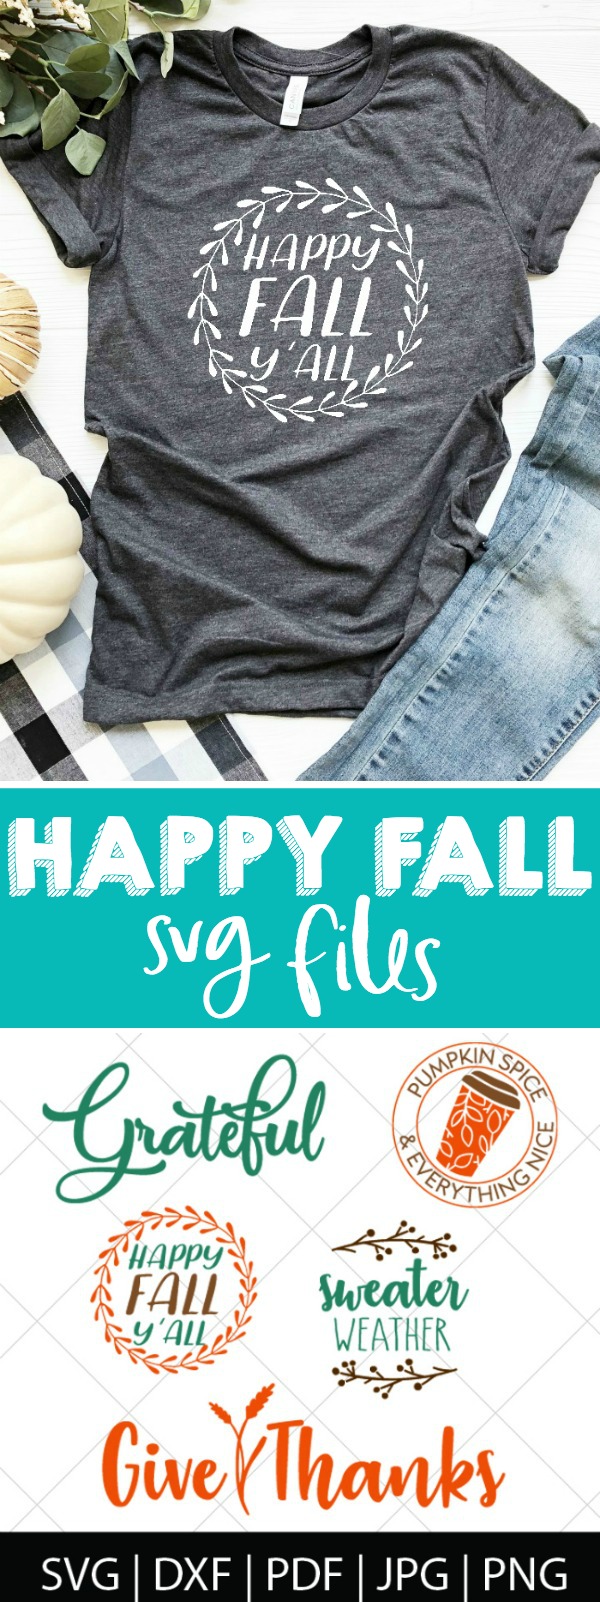 Fall is my favorite season of the year, so it's time to celebrate with these fun Fall SVG files! Perfect for making DIY shirts, custom mugs, homemade gifts and more! Plus I'm giving you all a FLASH FREEBIE fall design!  | THE LOVE NERDS #cricutfiles #silhouettefiles #svgcutfiles #falldiy